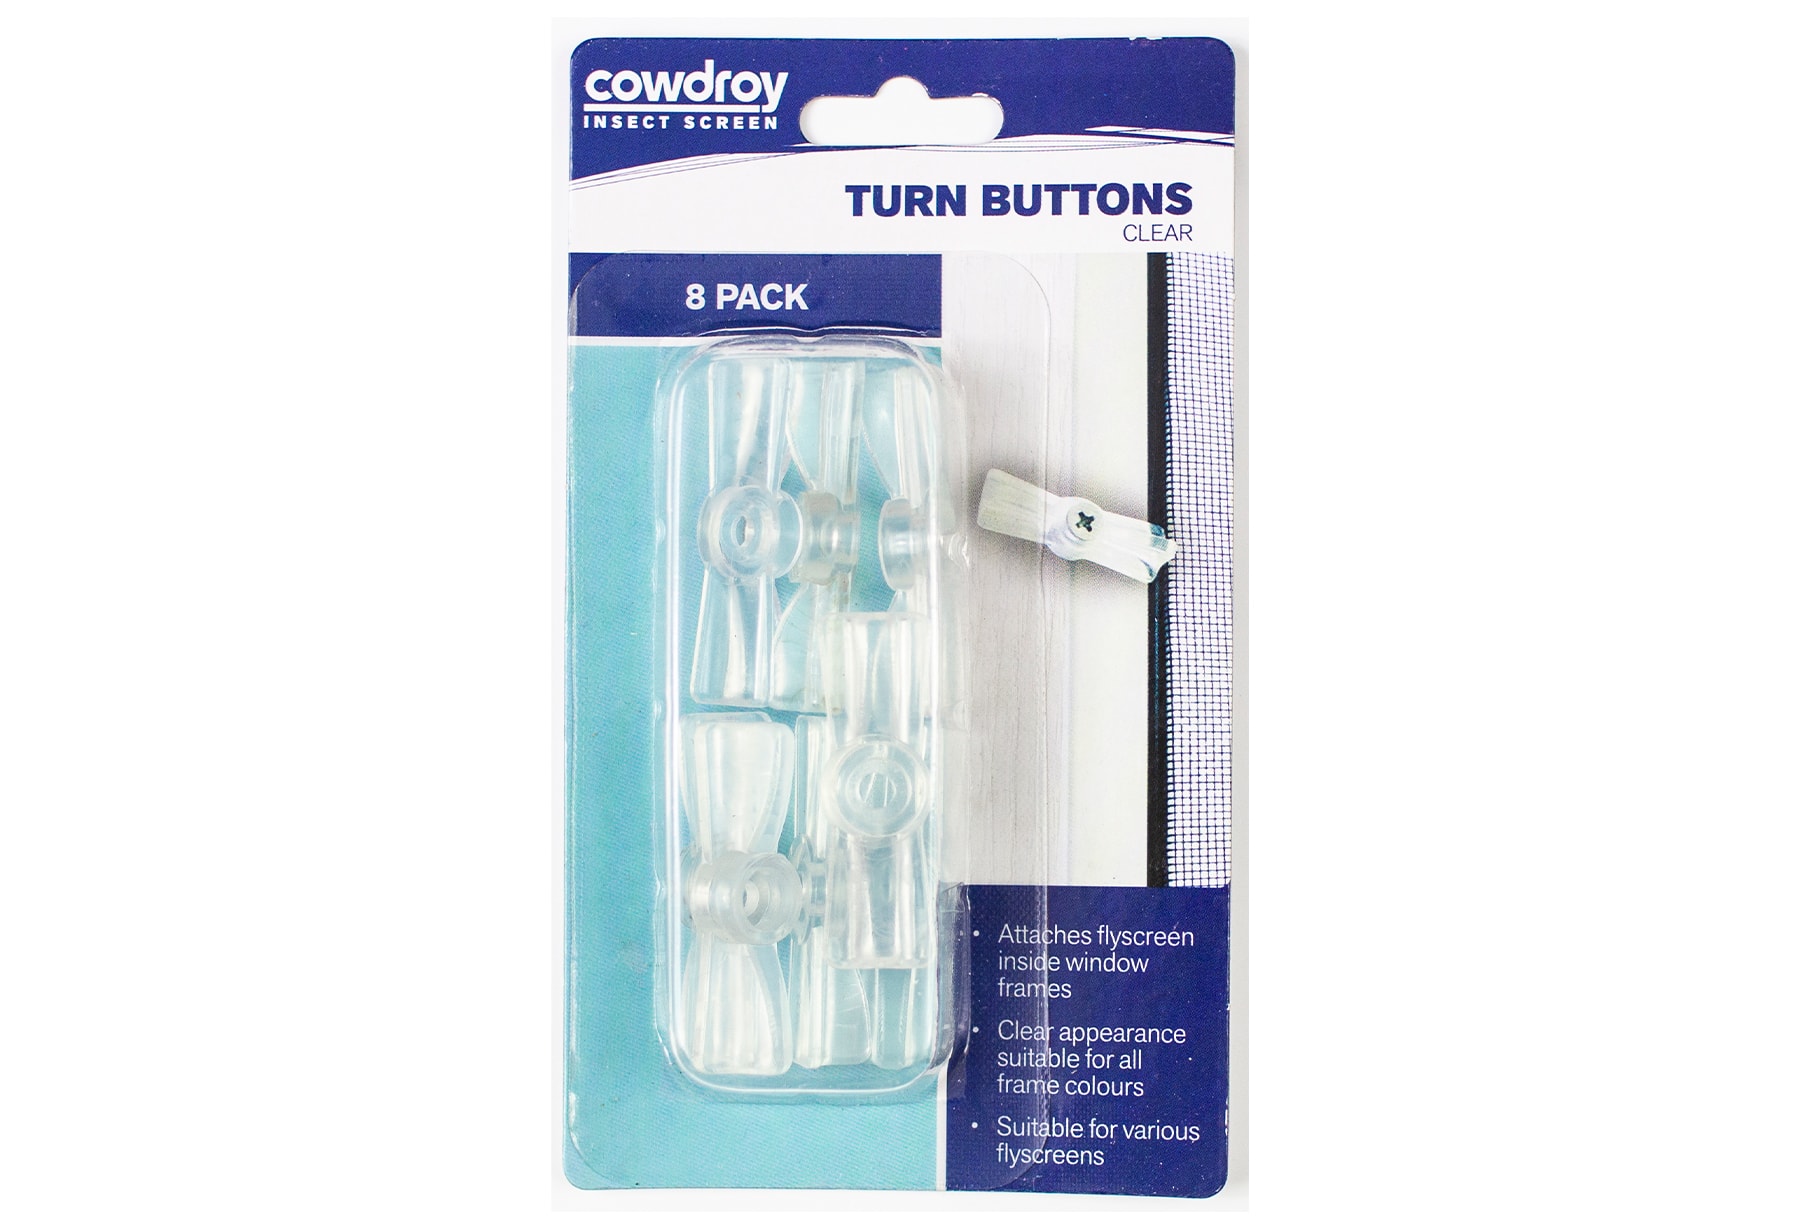 Turn Buttons (clear)